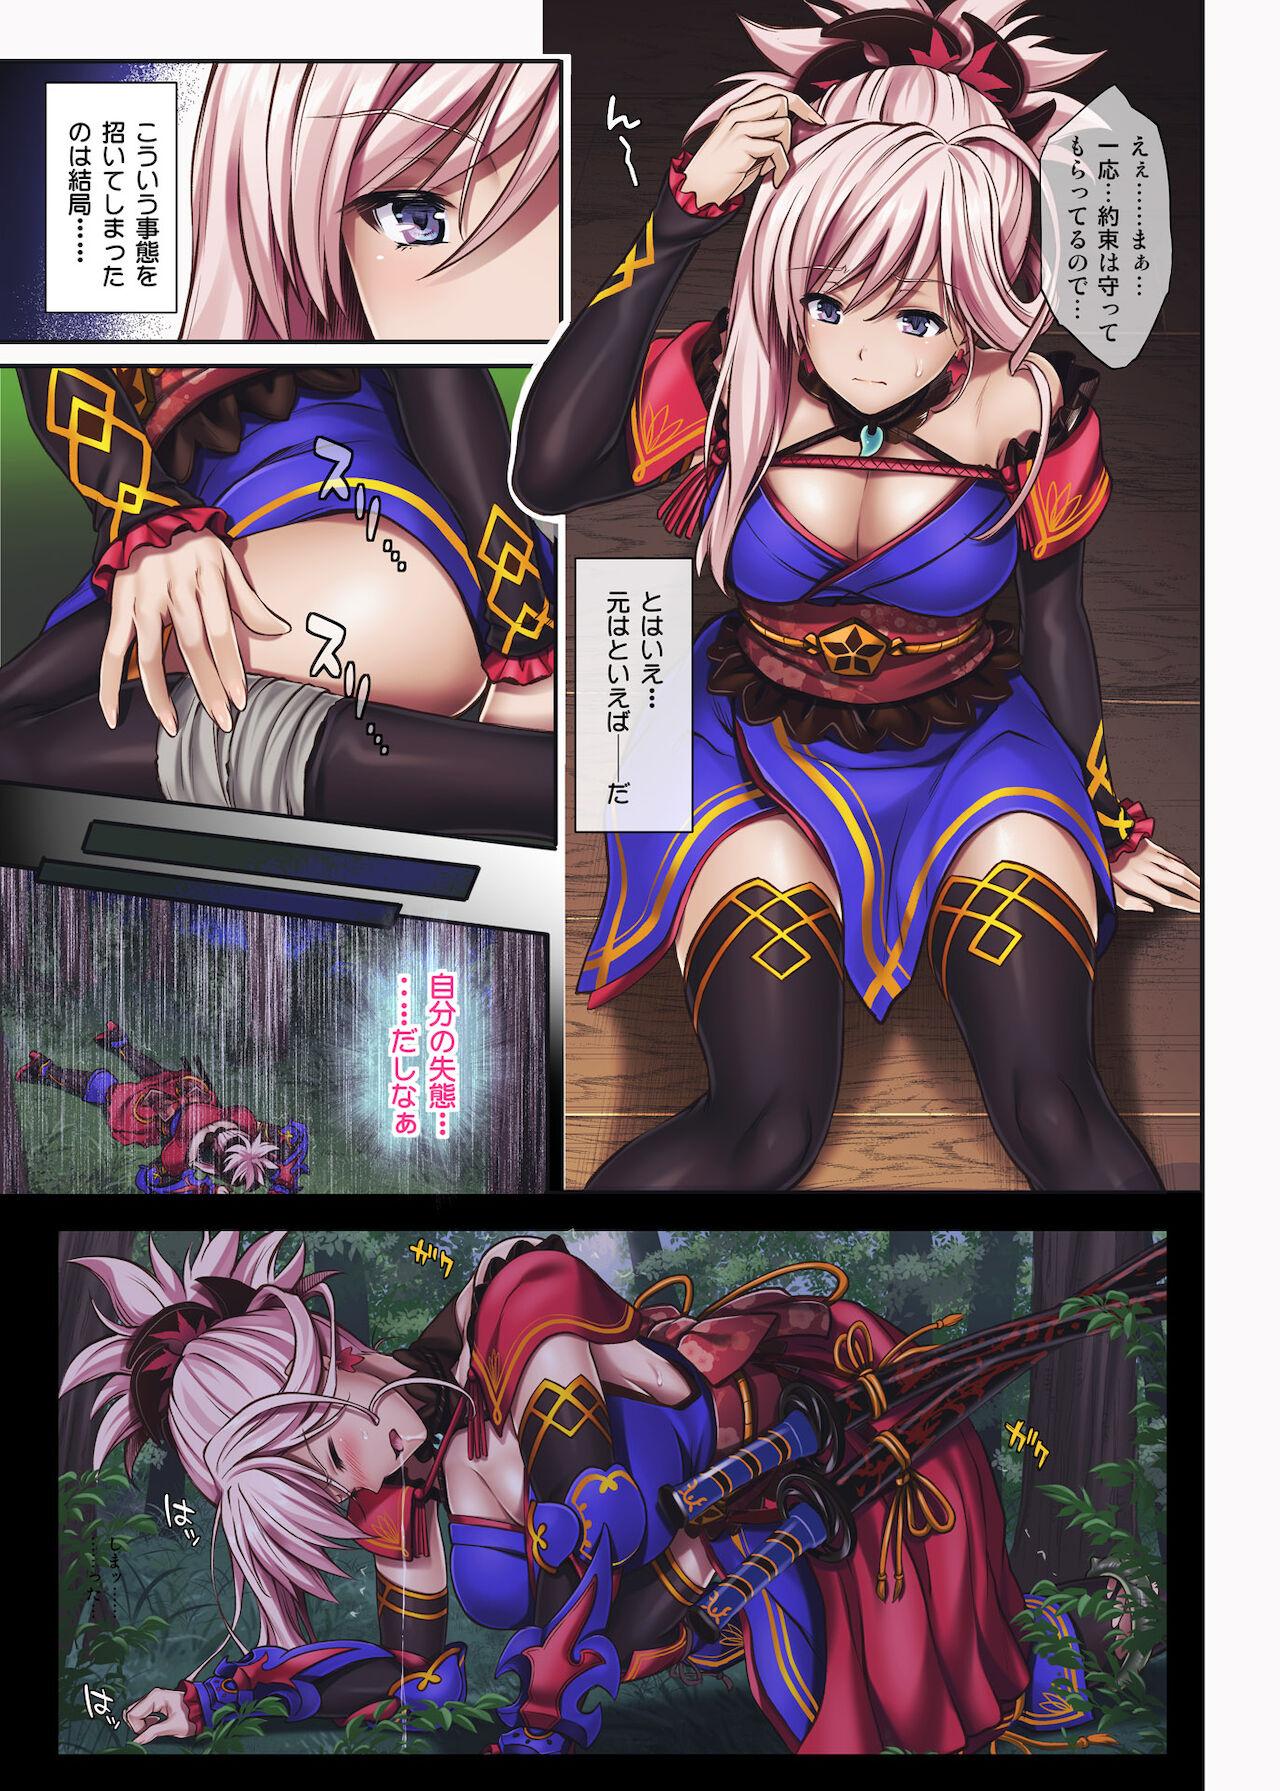 Atm Cyclone no Doujinshi Full Color Pack 4 - Fate grand order Bhabhi - Page 6